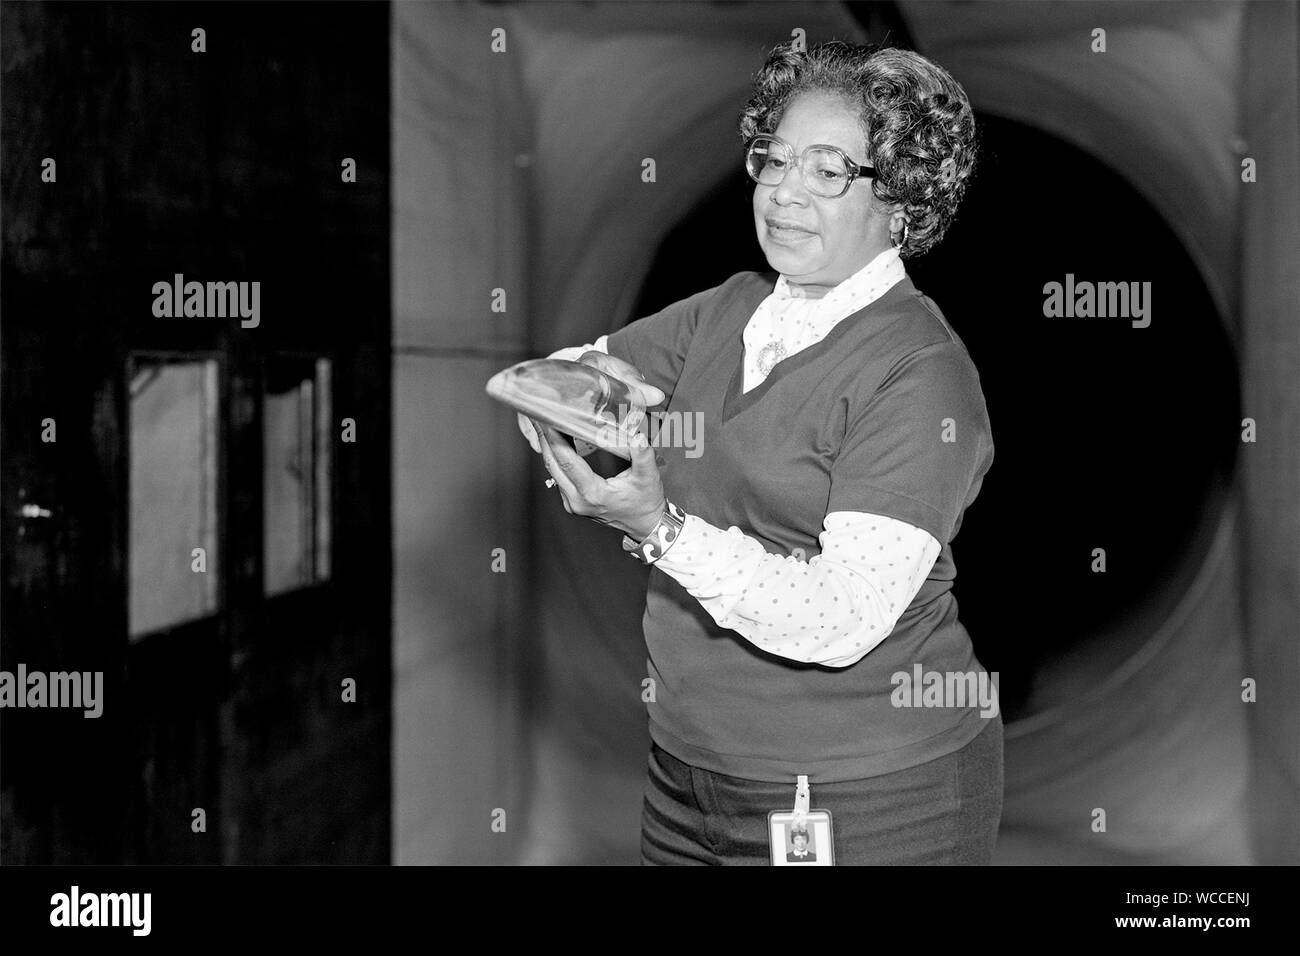 Mary Jackson, a 'human computer' featured in the film Hidden Figures, holding a model at NASA Langley Research Center in Hampton, Virginia. (USA) Stock Photo